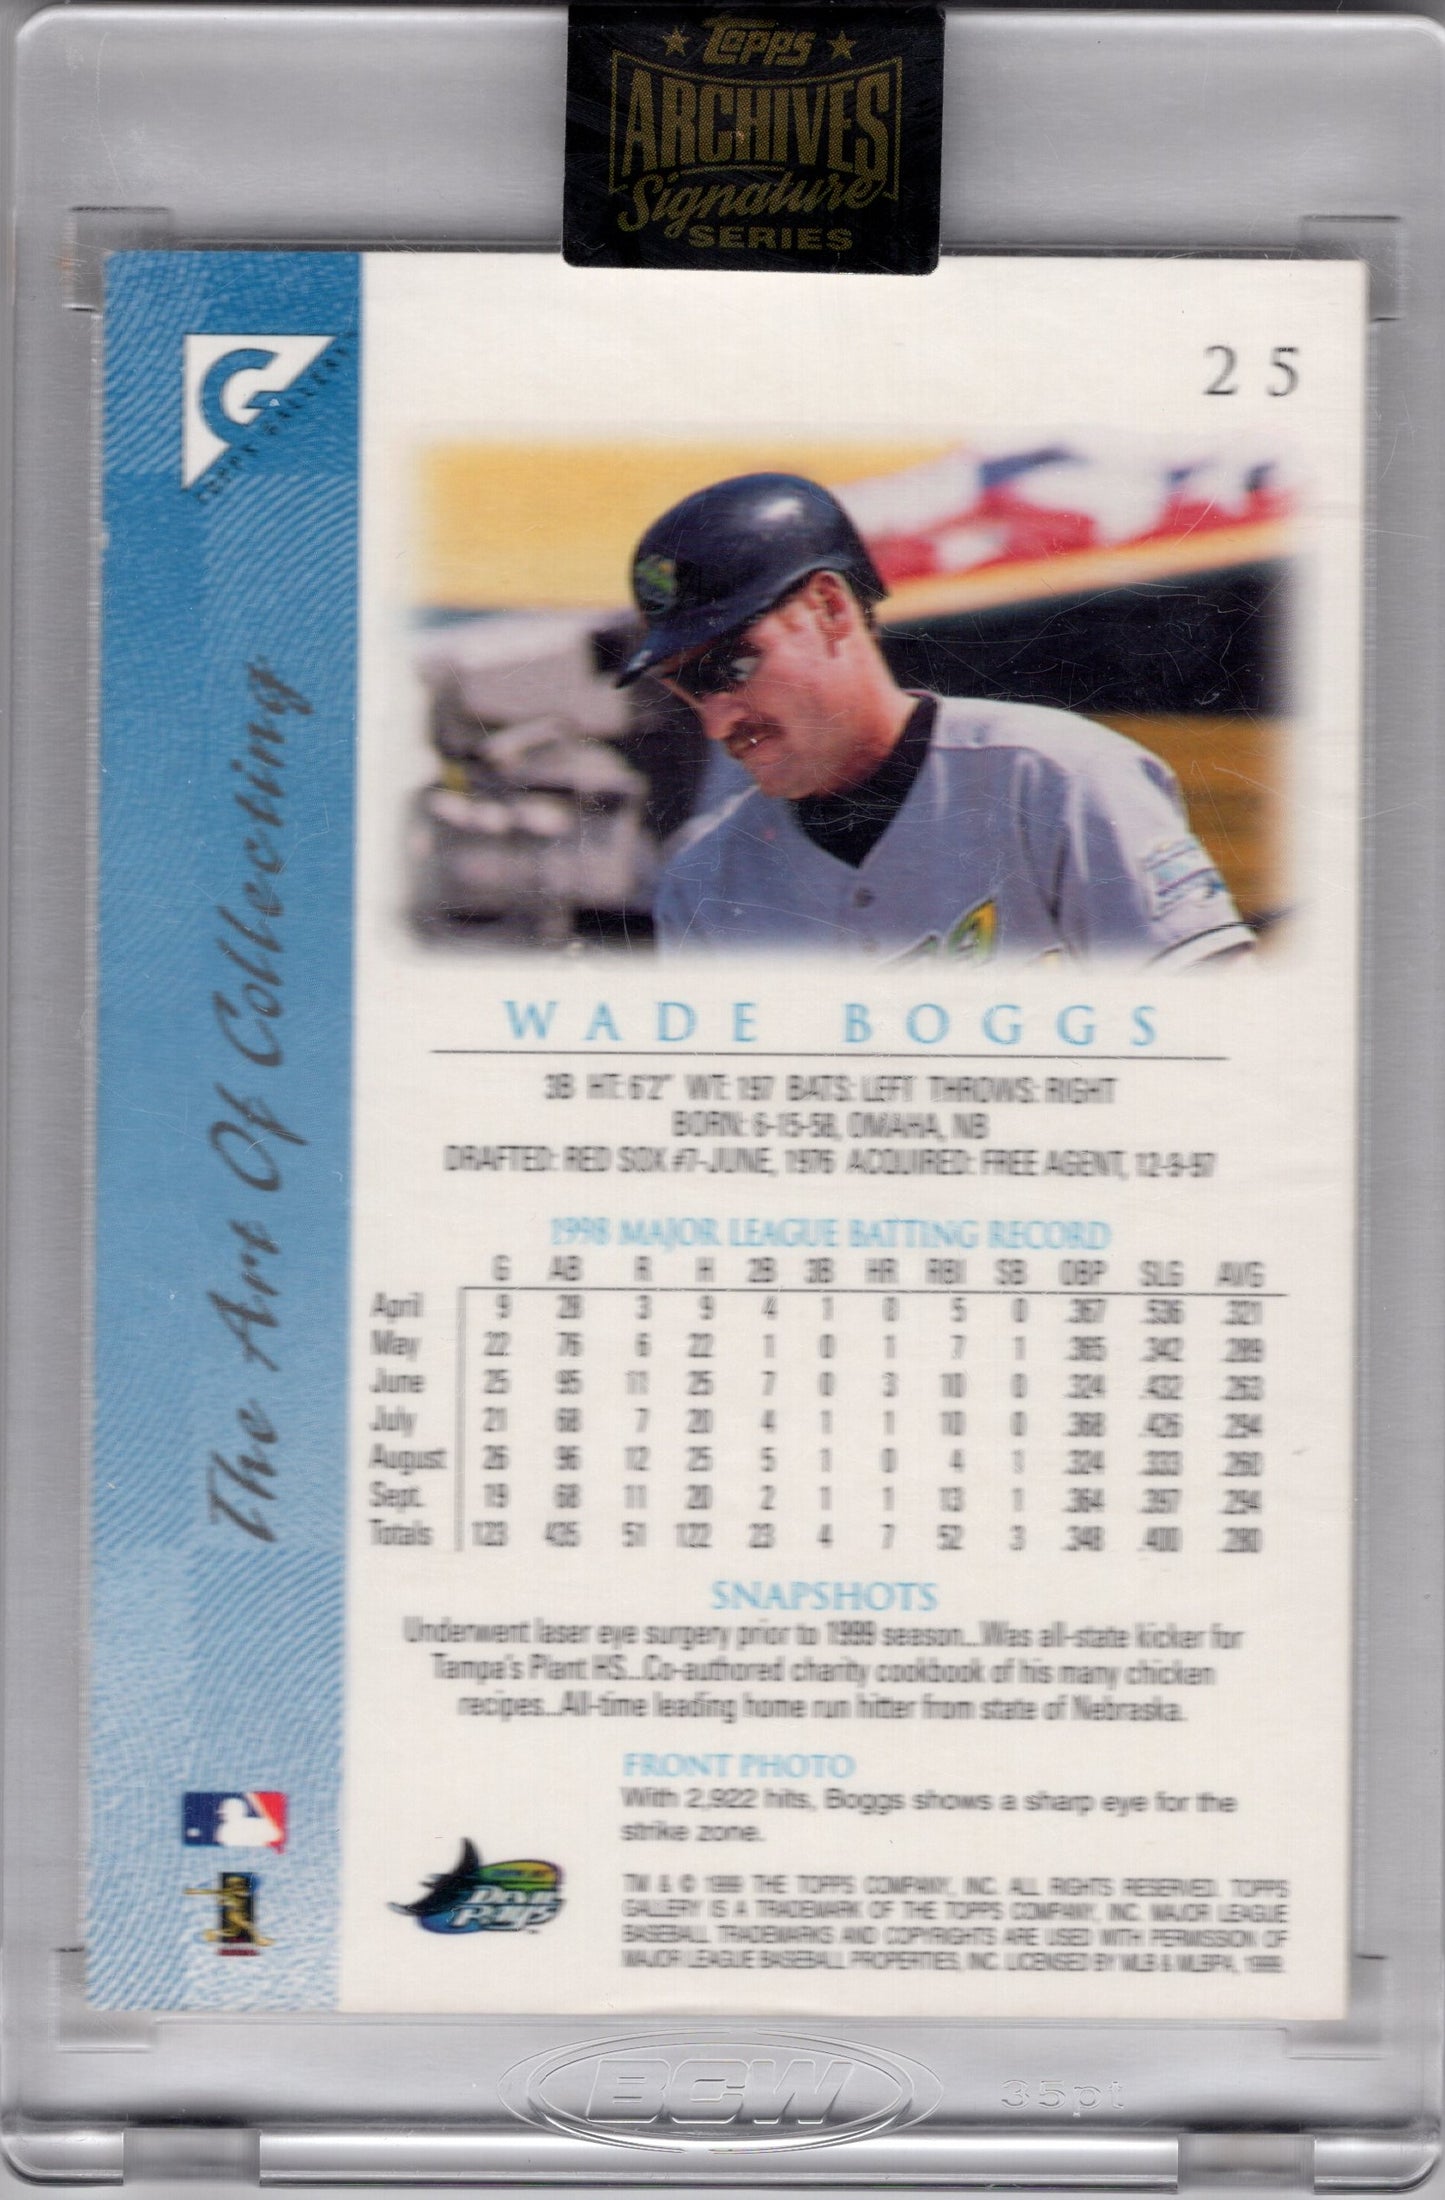 2022 Topps Archives Signature Series Wade Boggs 1/1